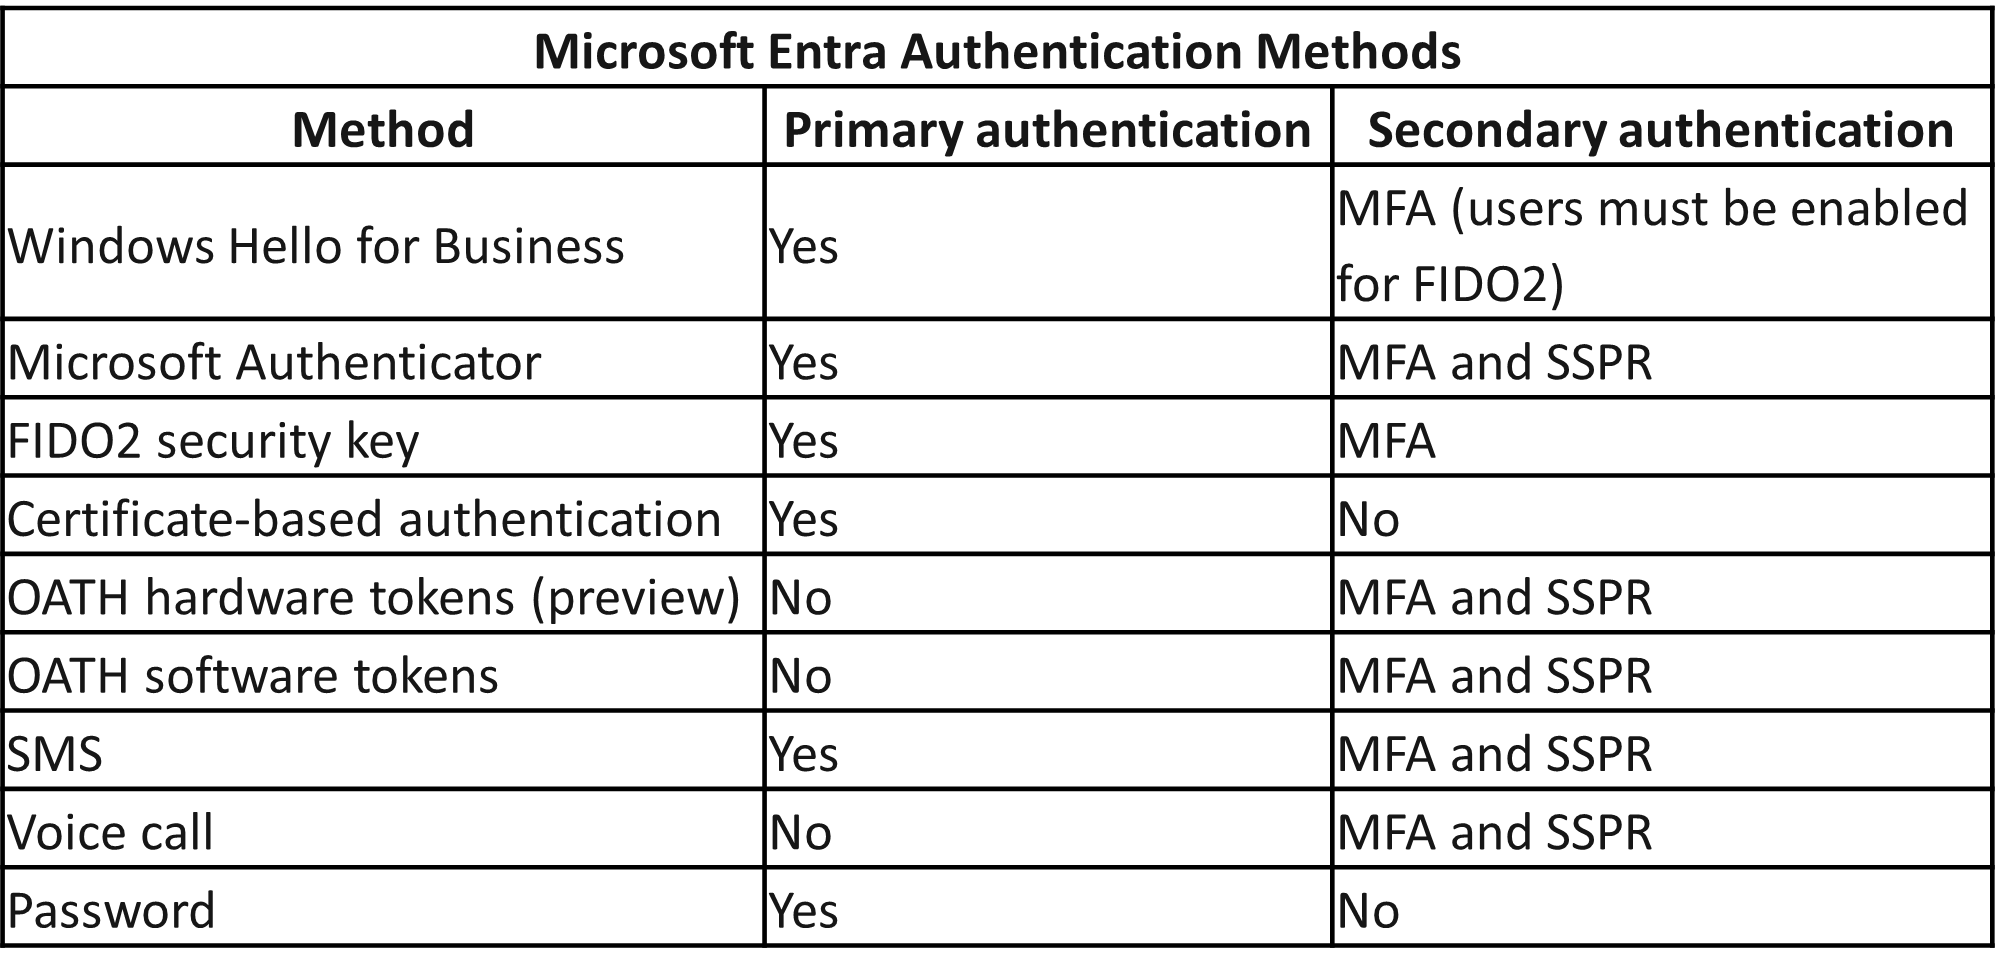 Screen capture of a table that summarizes if authentication method is used for primary and/or secondary authentications.